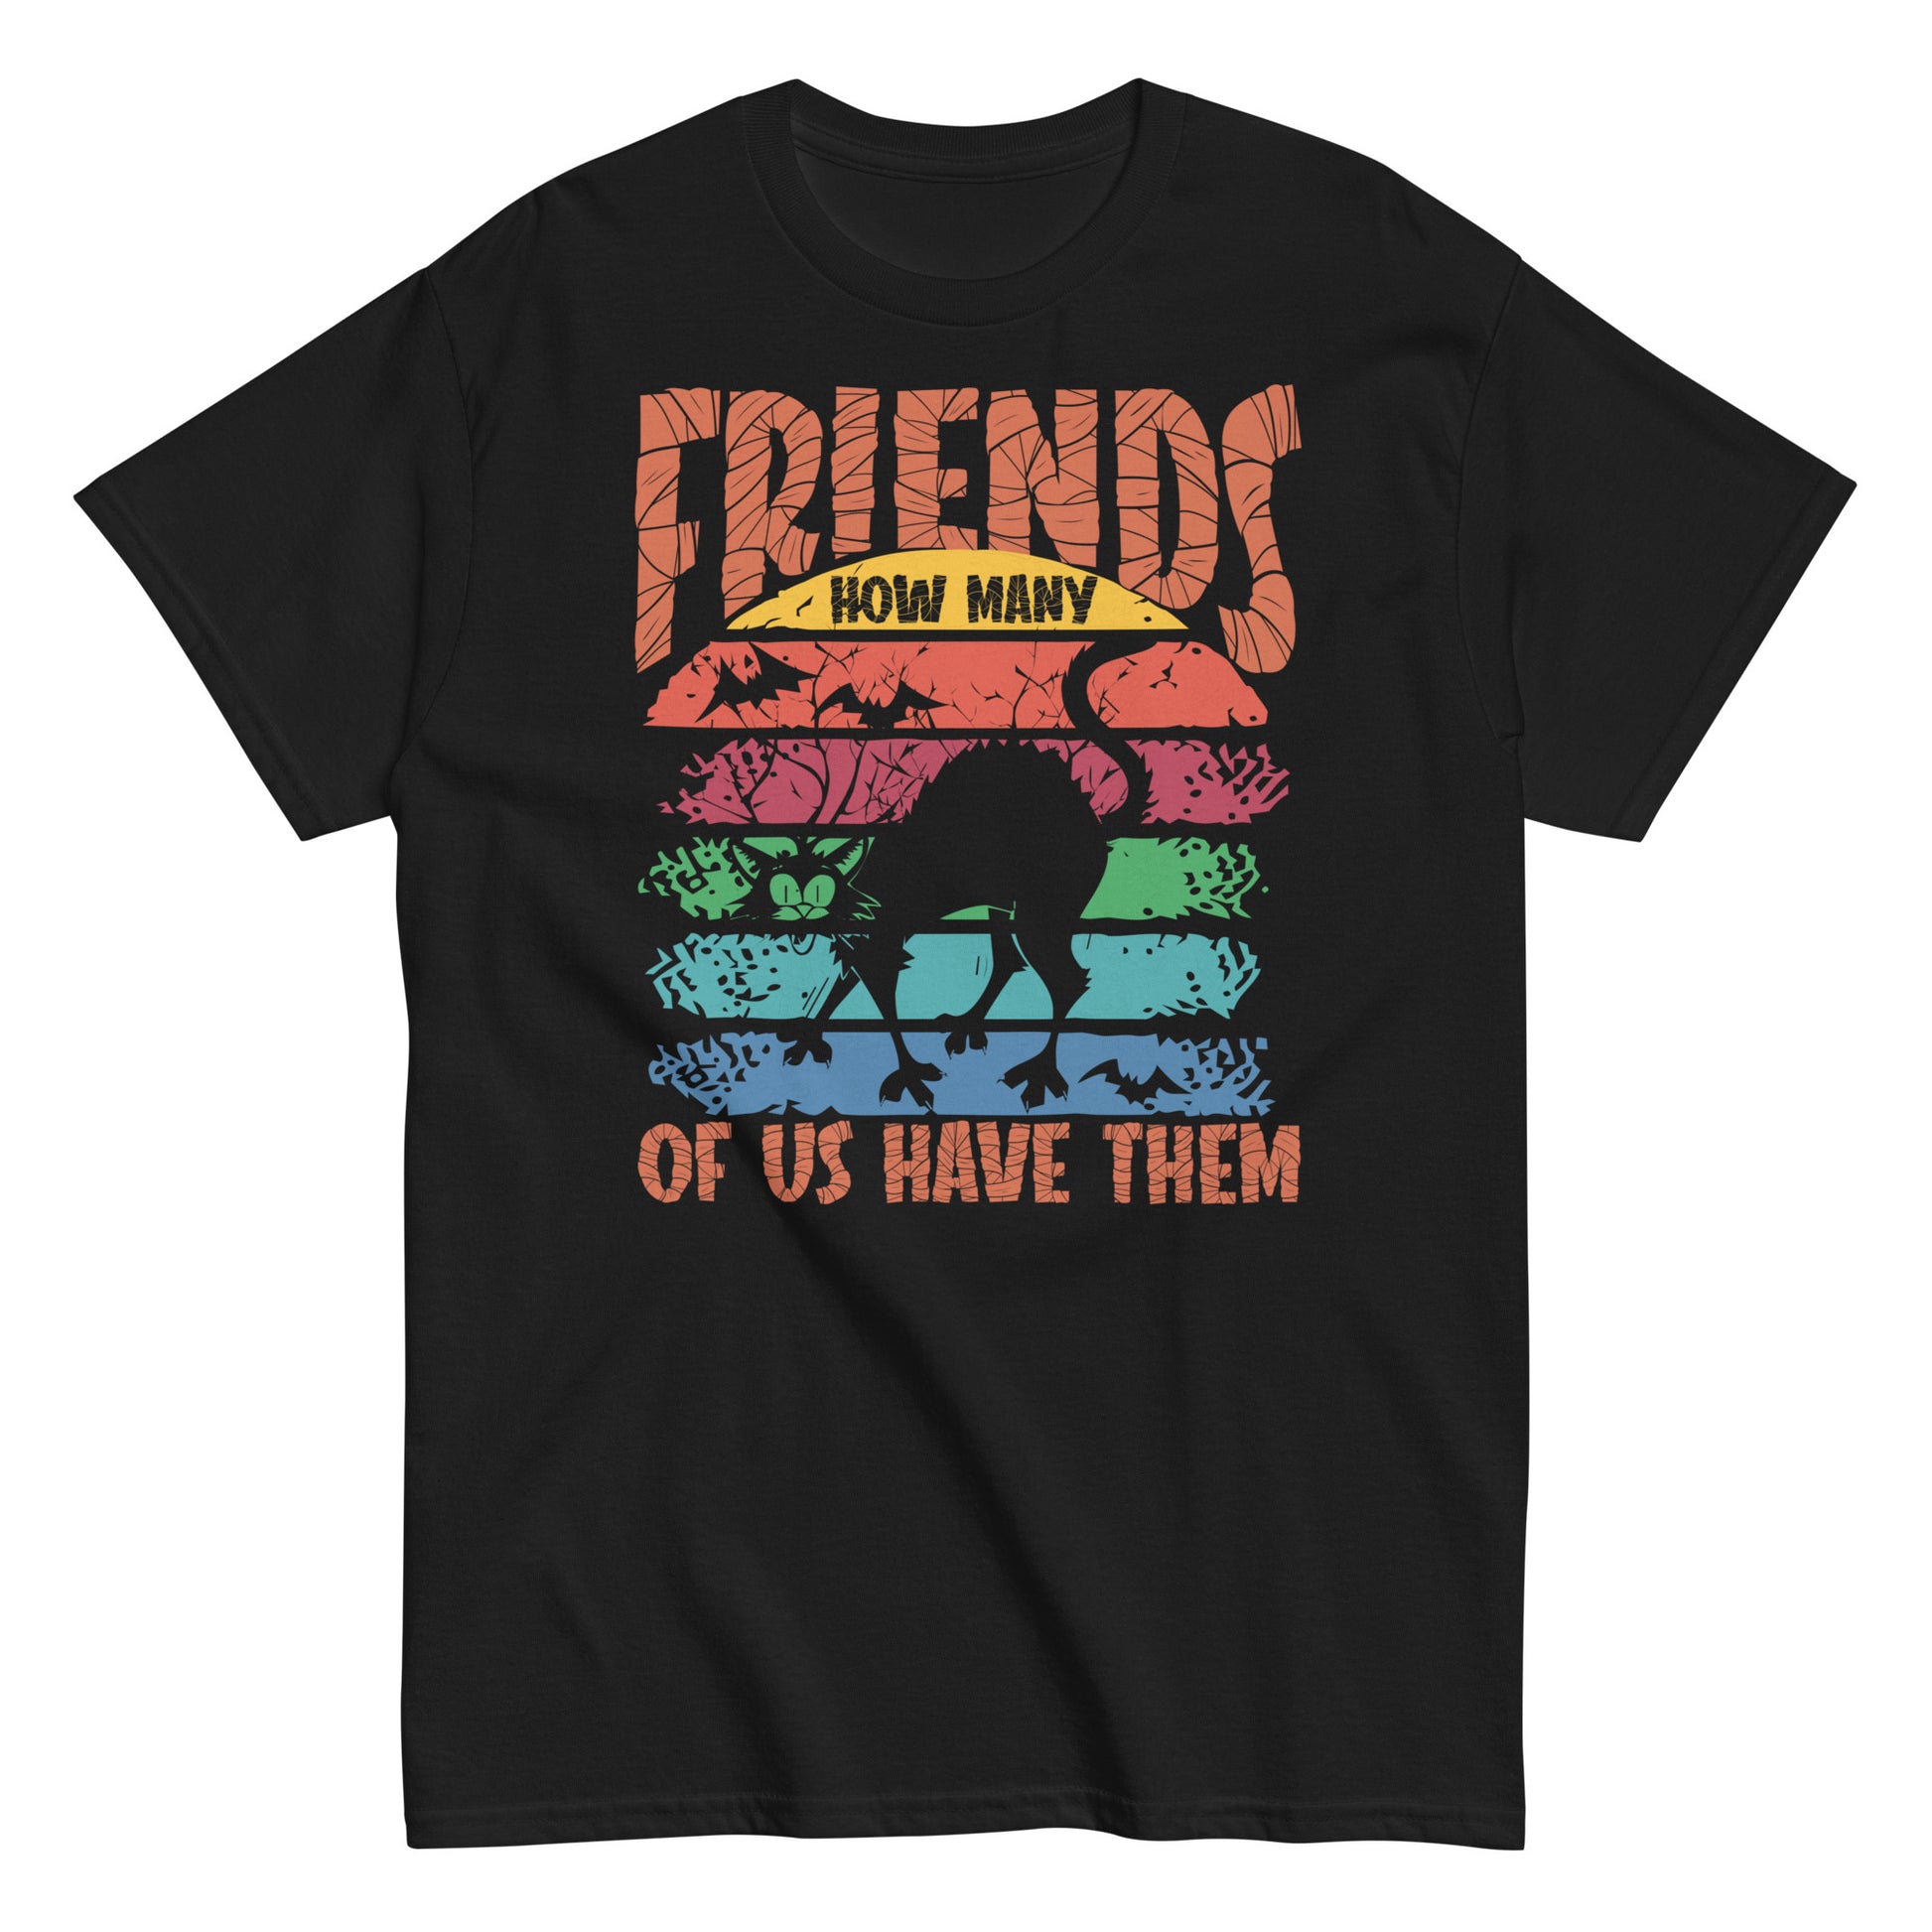 Celebrate with Friends: Halloween Tee - How Many of Us Have Them